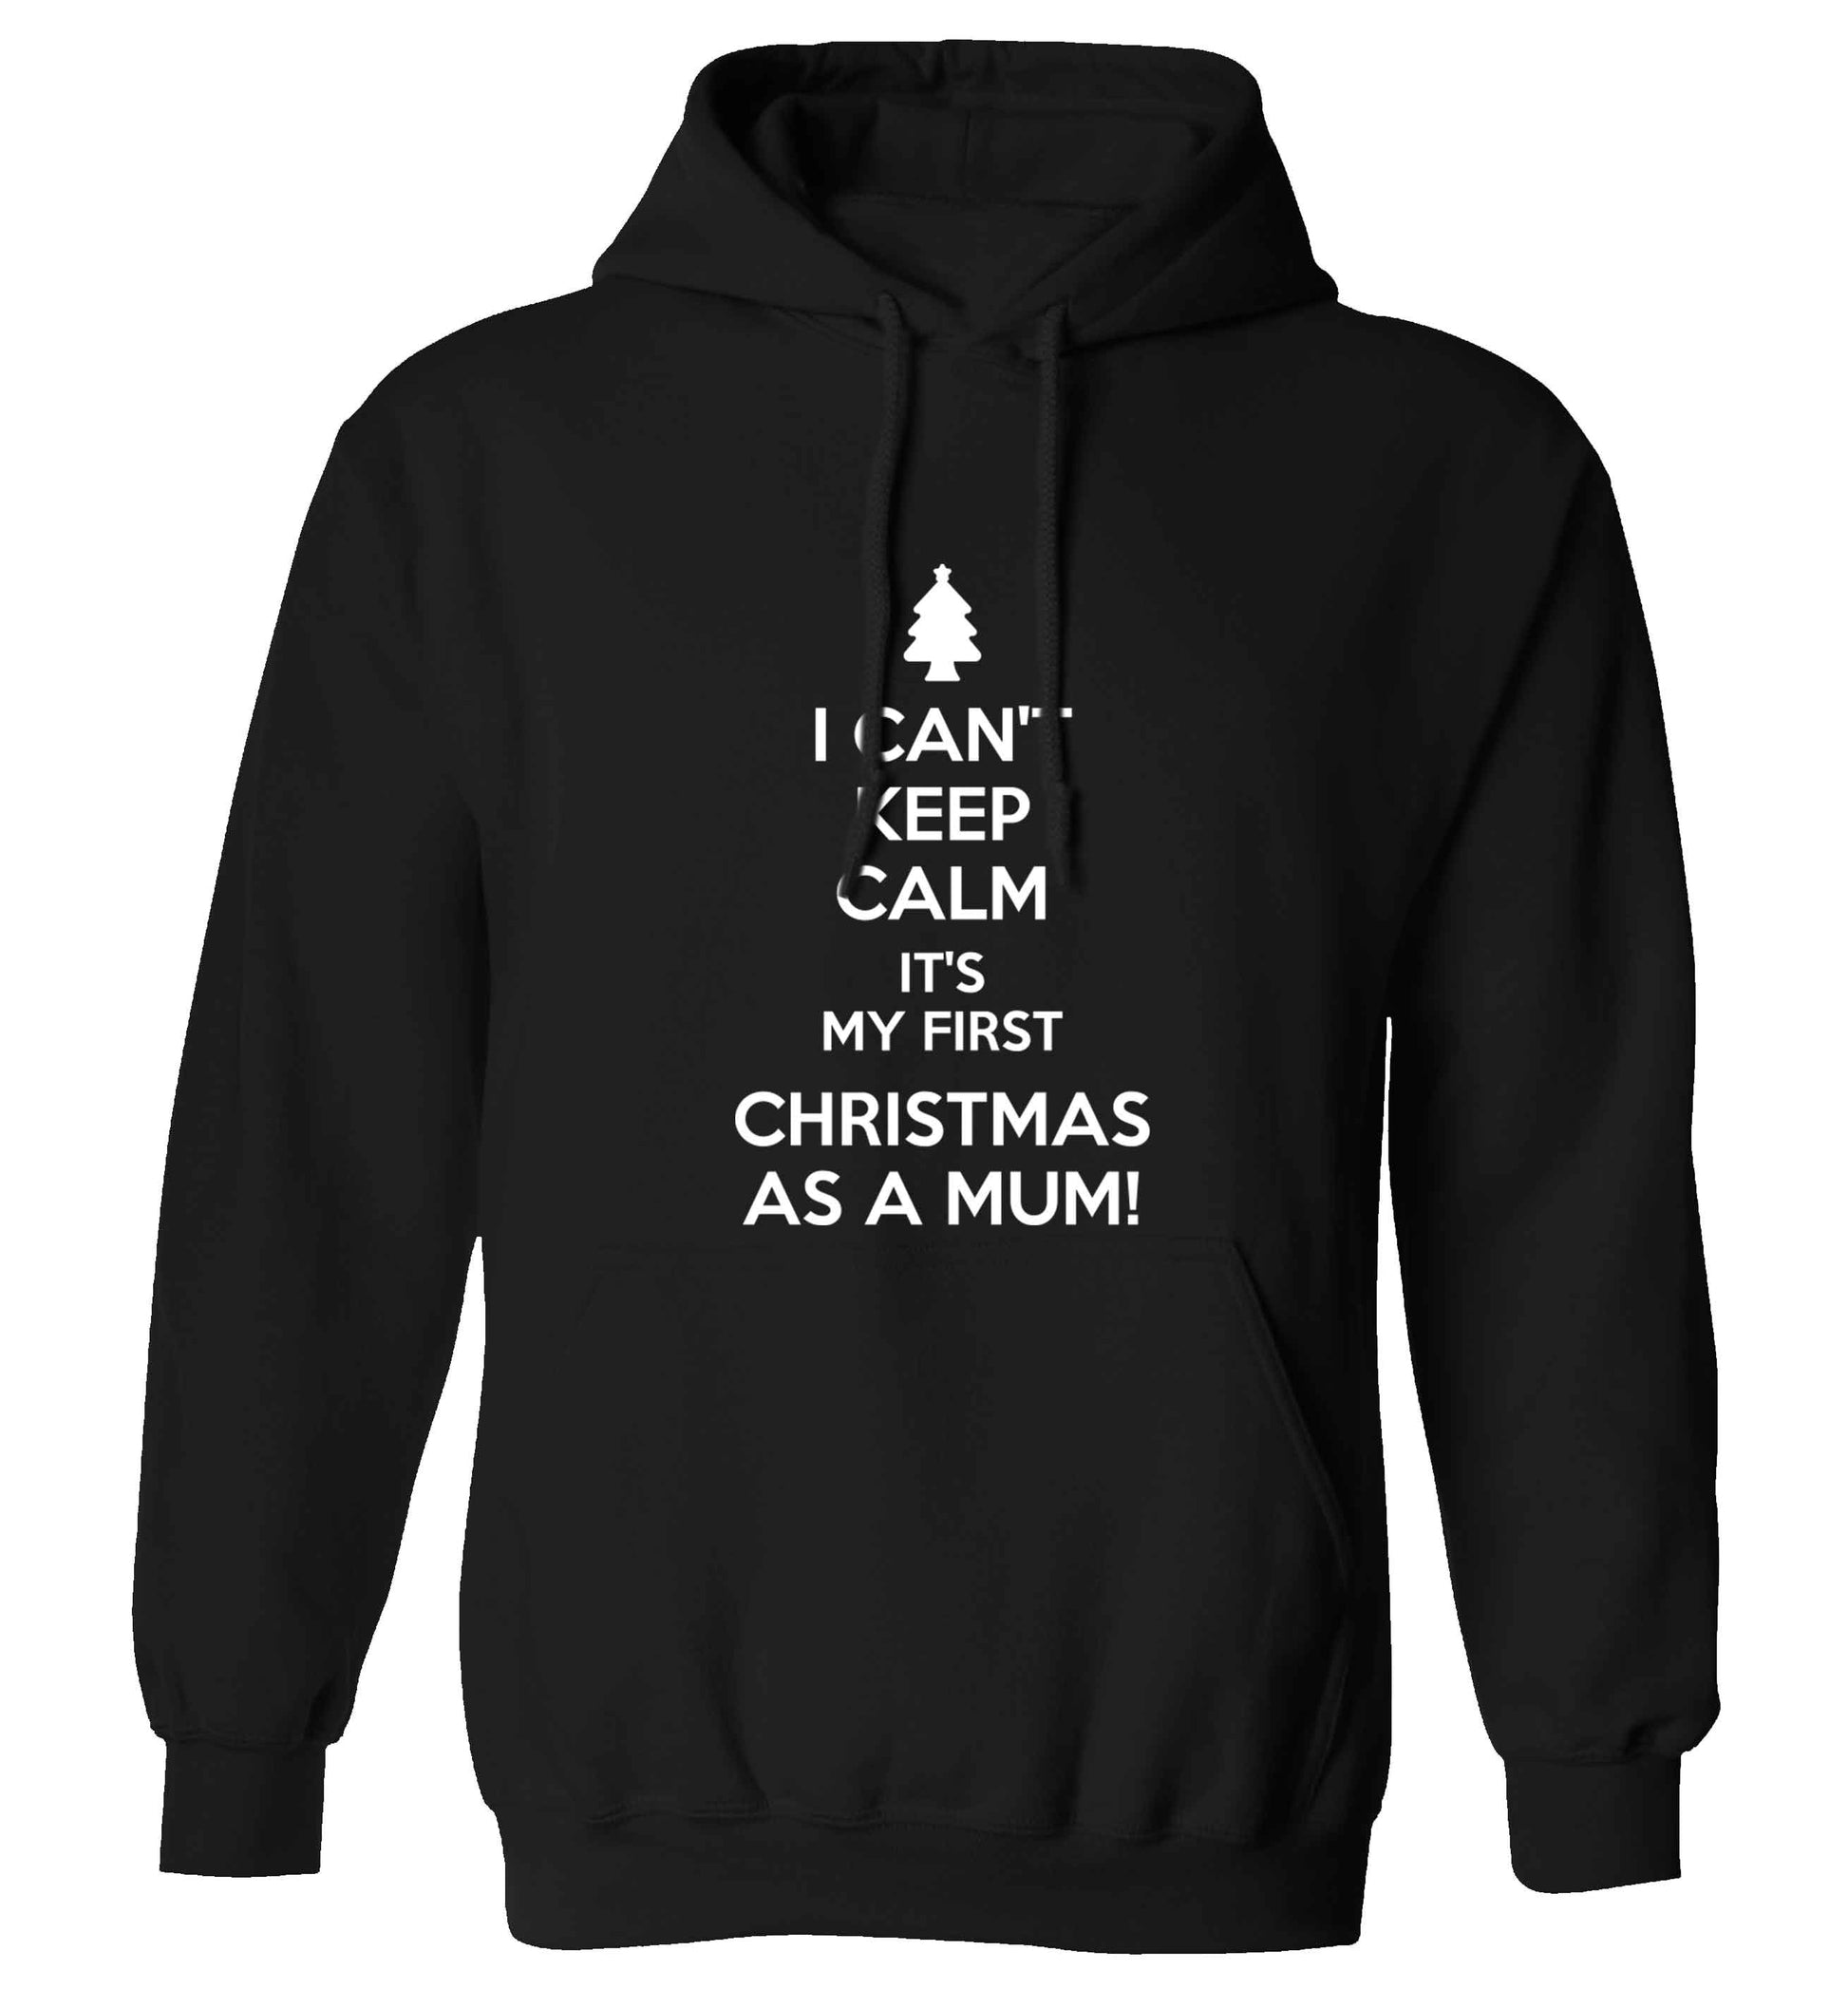 I can't keep calm it's my first Christmas as a mum adults unisex black hoodie 2XL